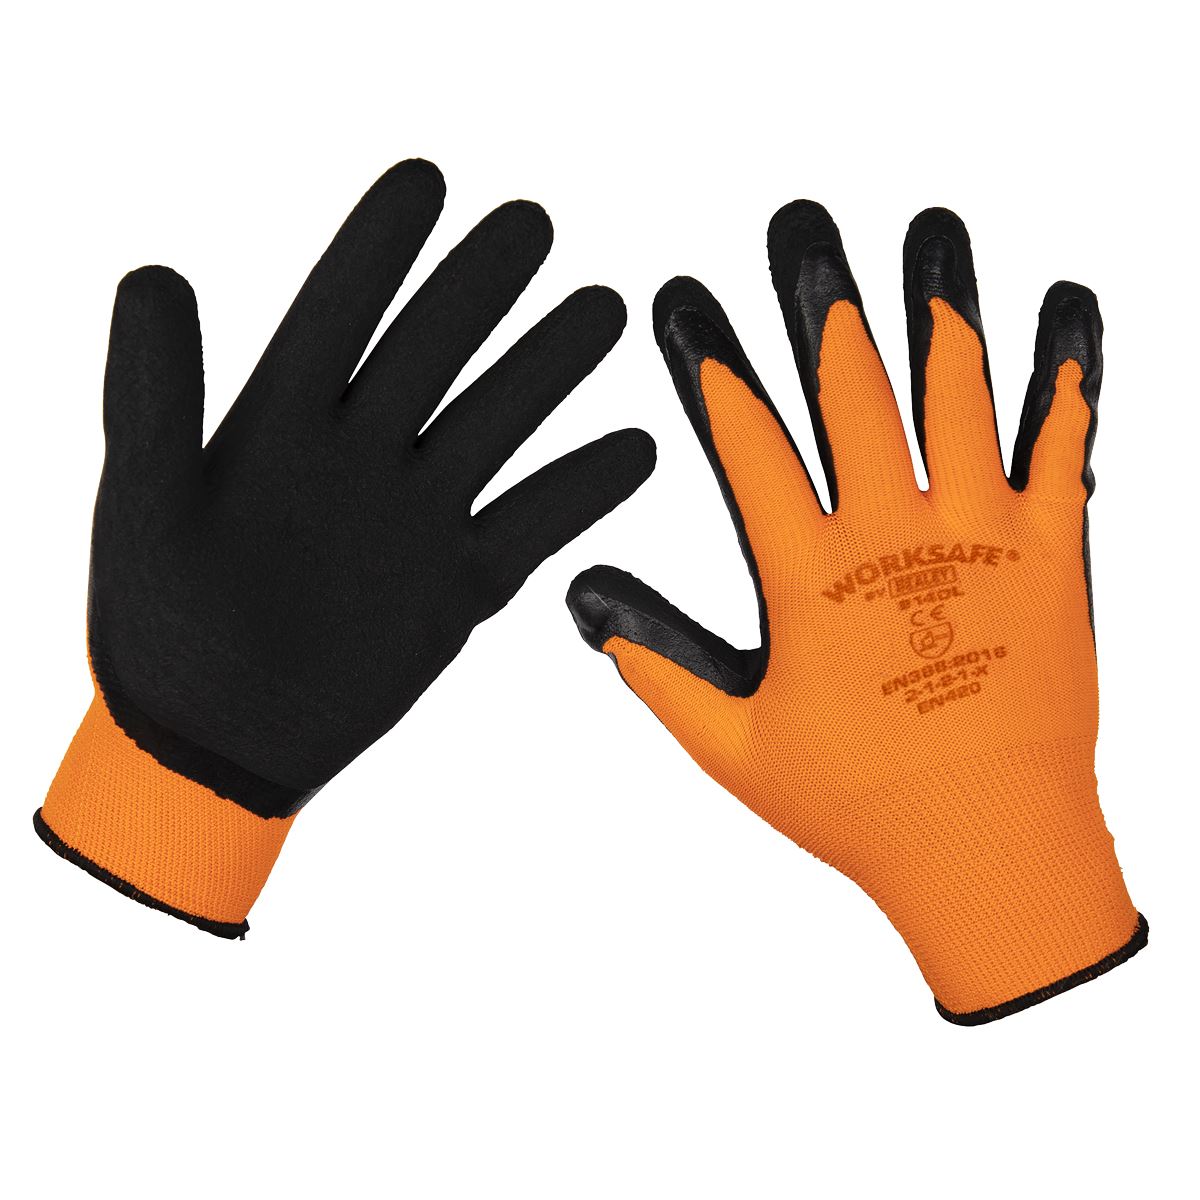 Worksafe by Sealey Foam Latex Gloves (Large) - Pair